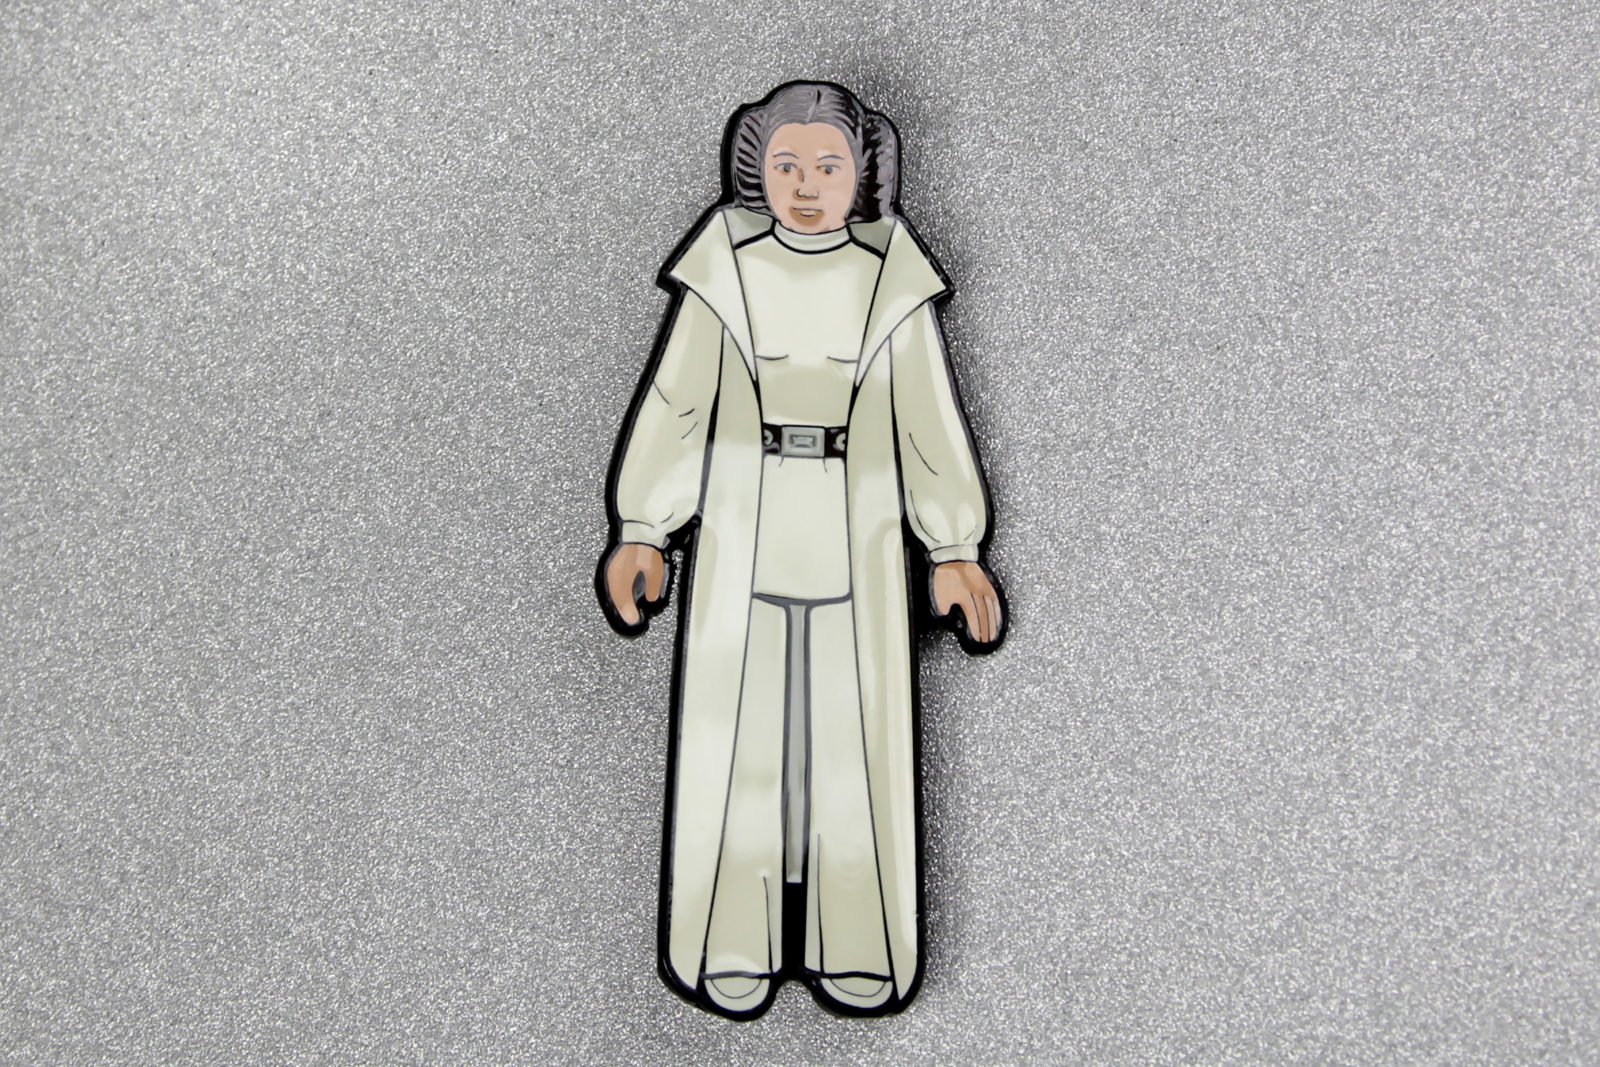 Princess Leia Vintage Action Figure Pin, by Gentle Giant